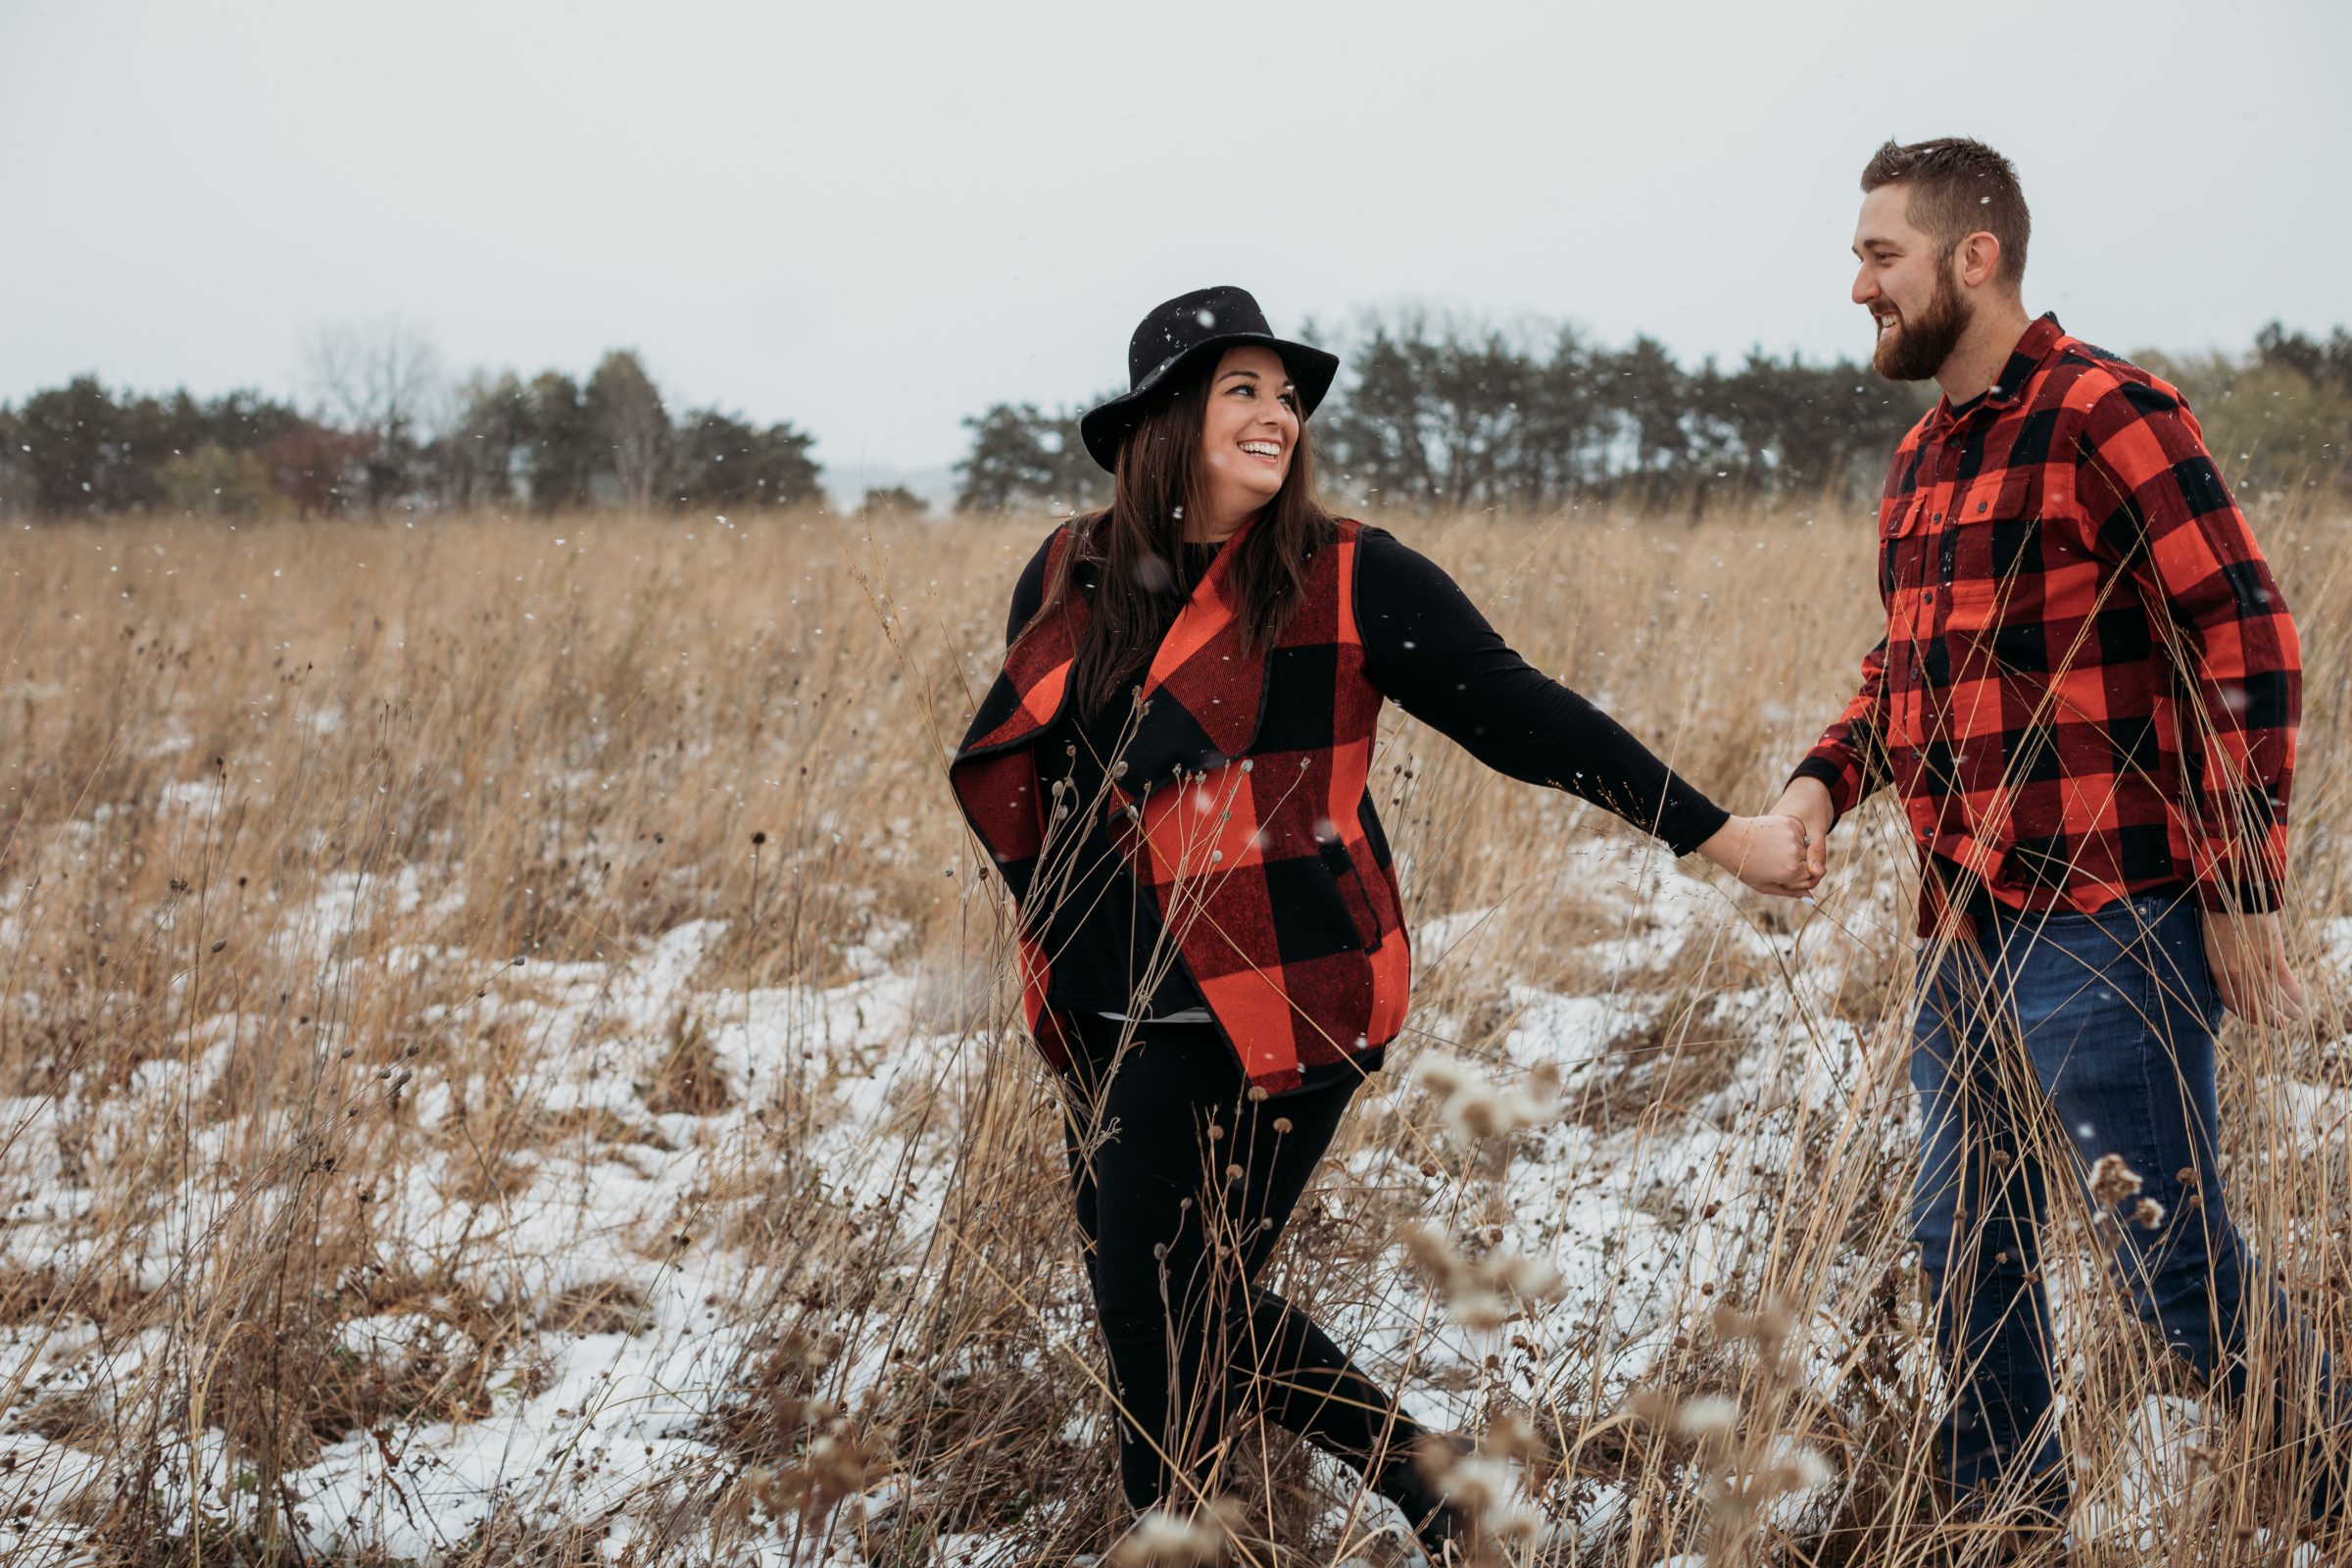 Couple walks through field in engagement photo by a woman-owned wedding business